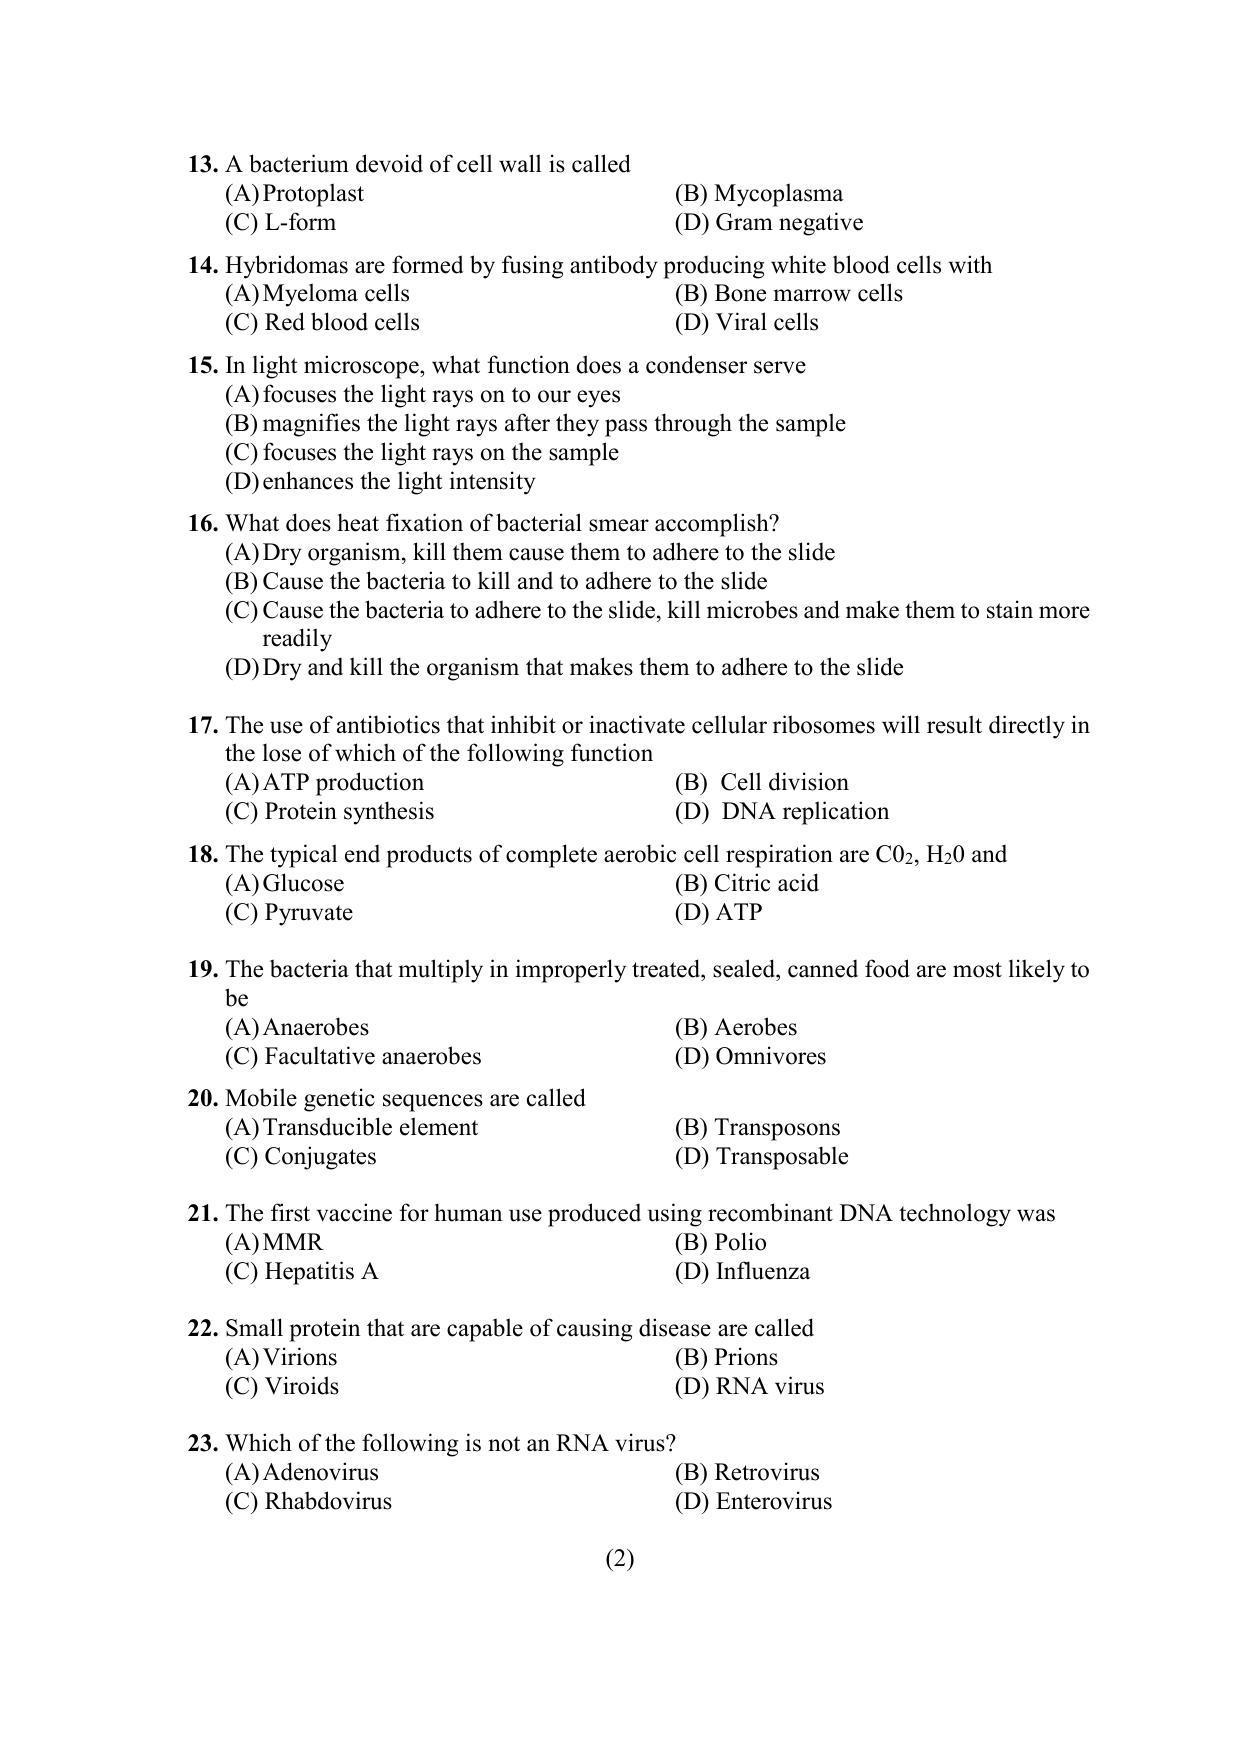 PU MPET Anthropology 2022 Question Papers - Page 50